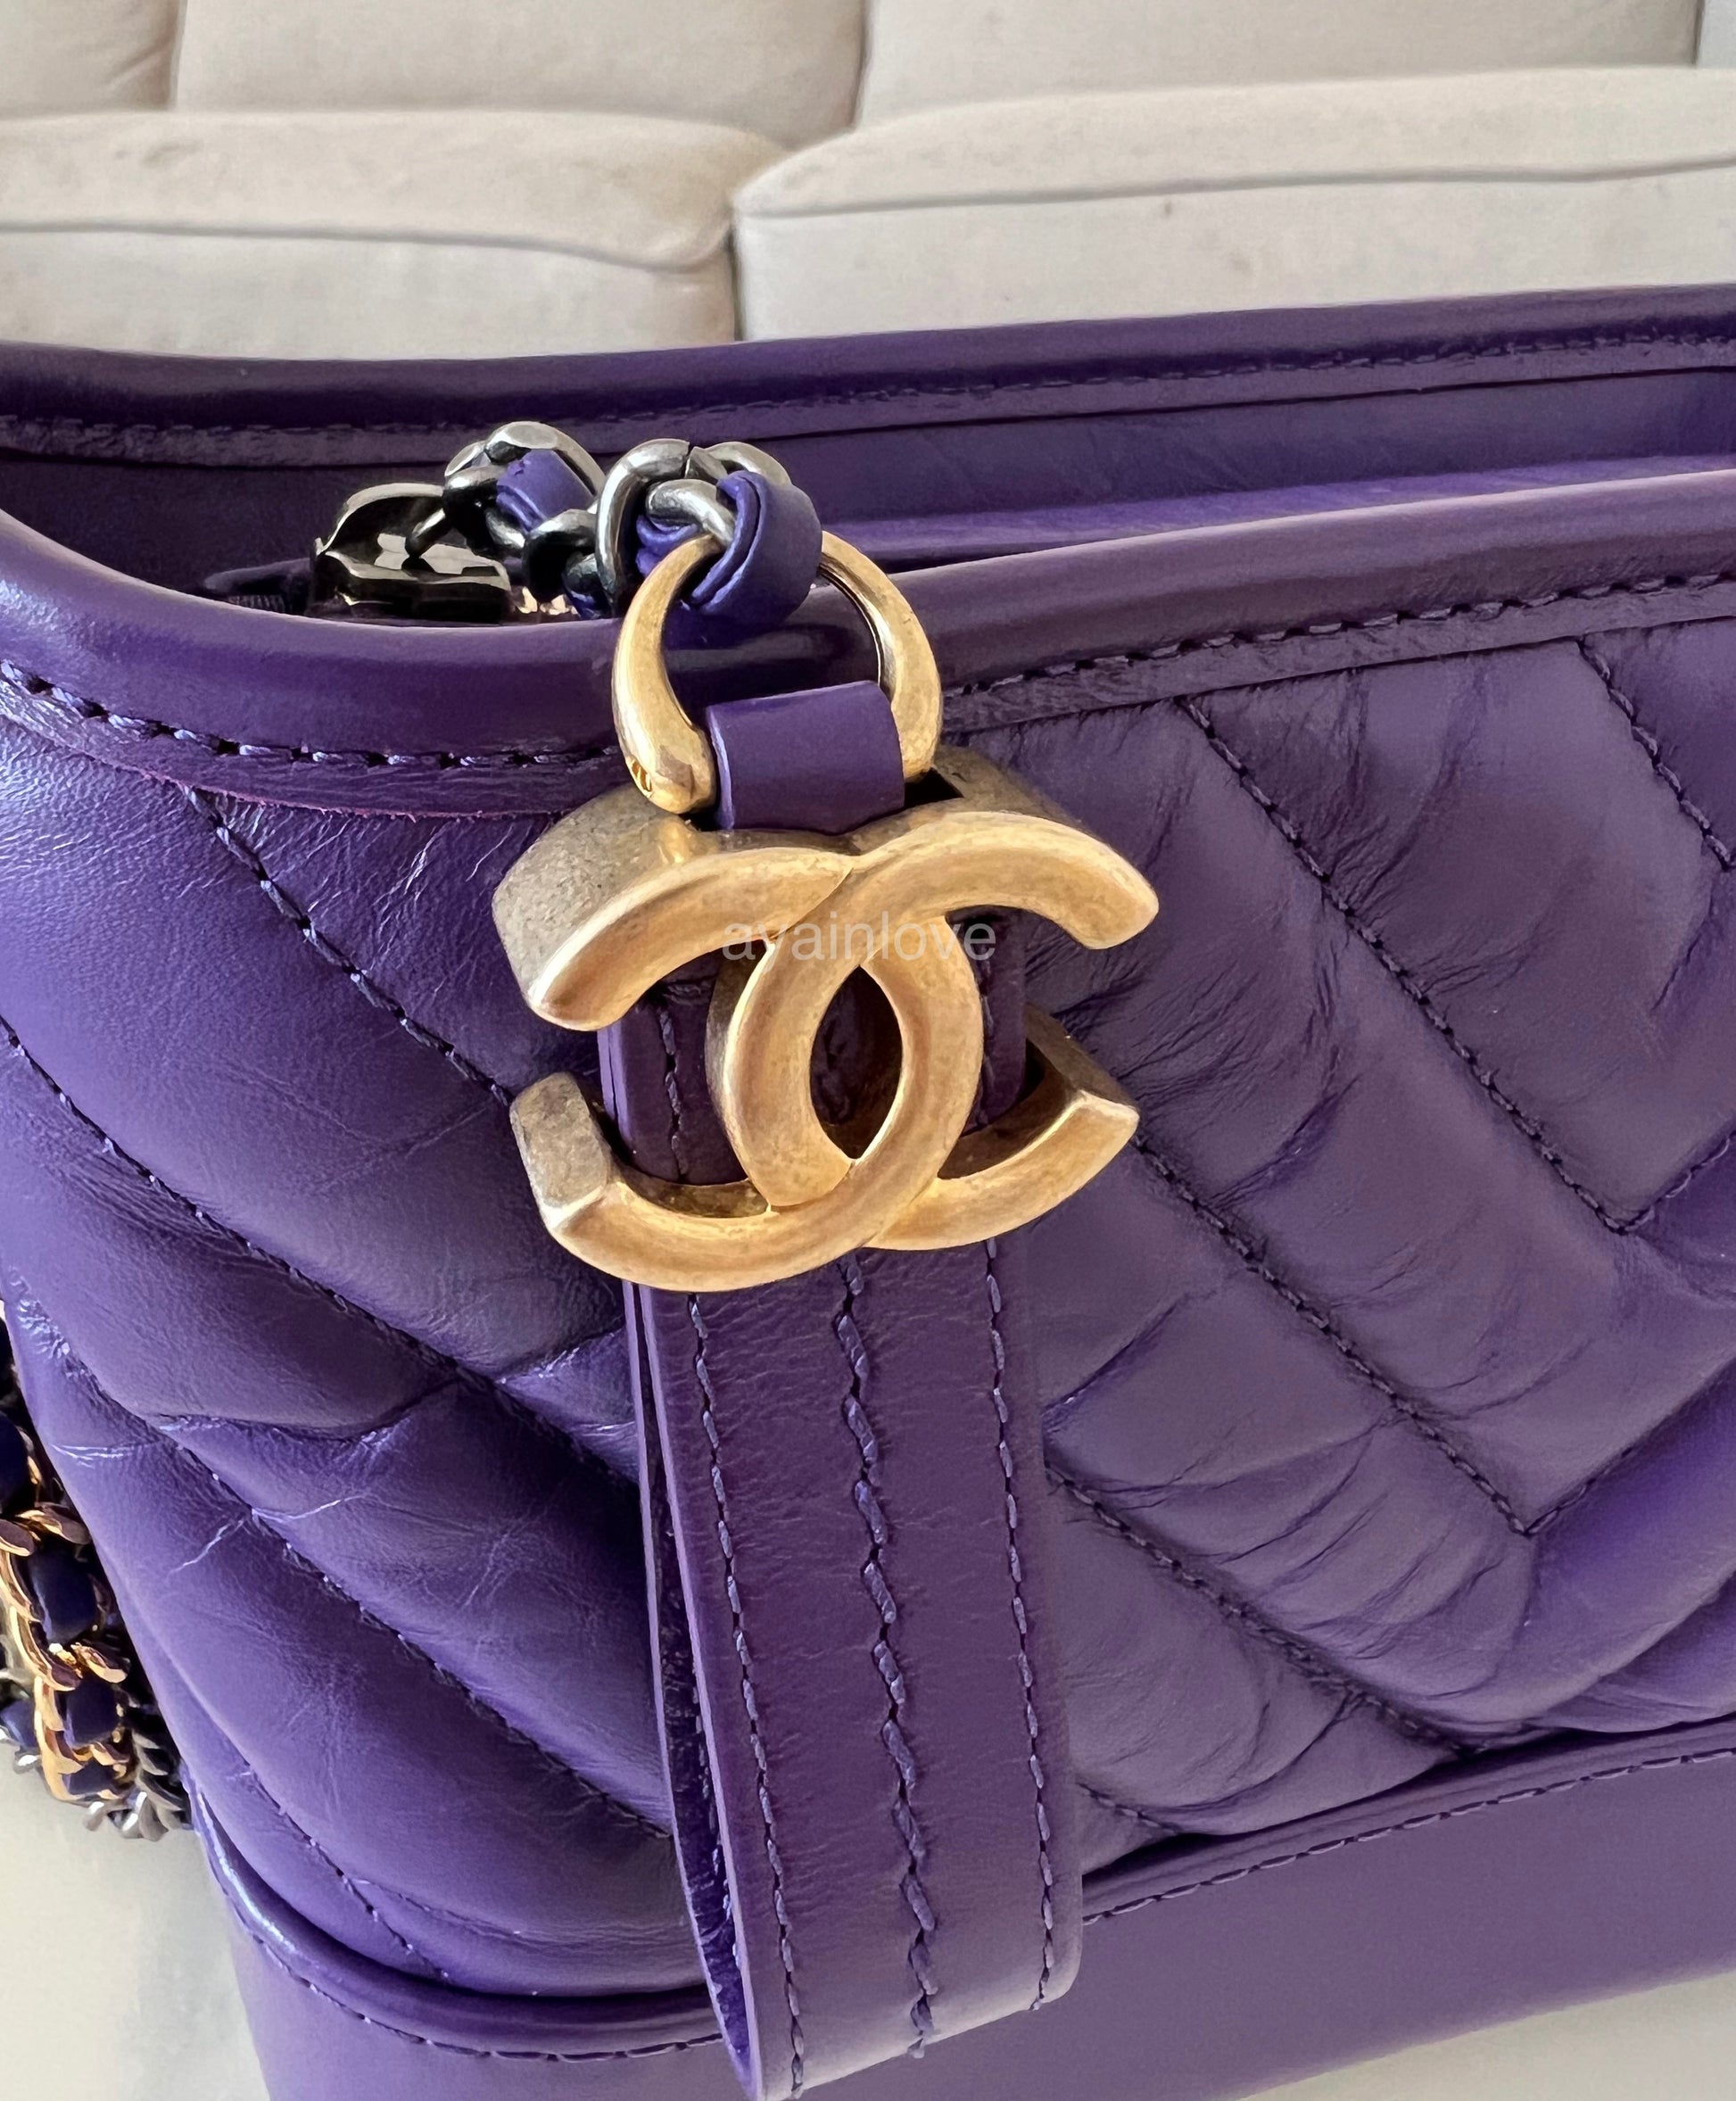 Chanel Small Gabrielle Hobo Iridescent Blue Mixed Hardware